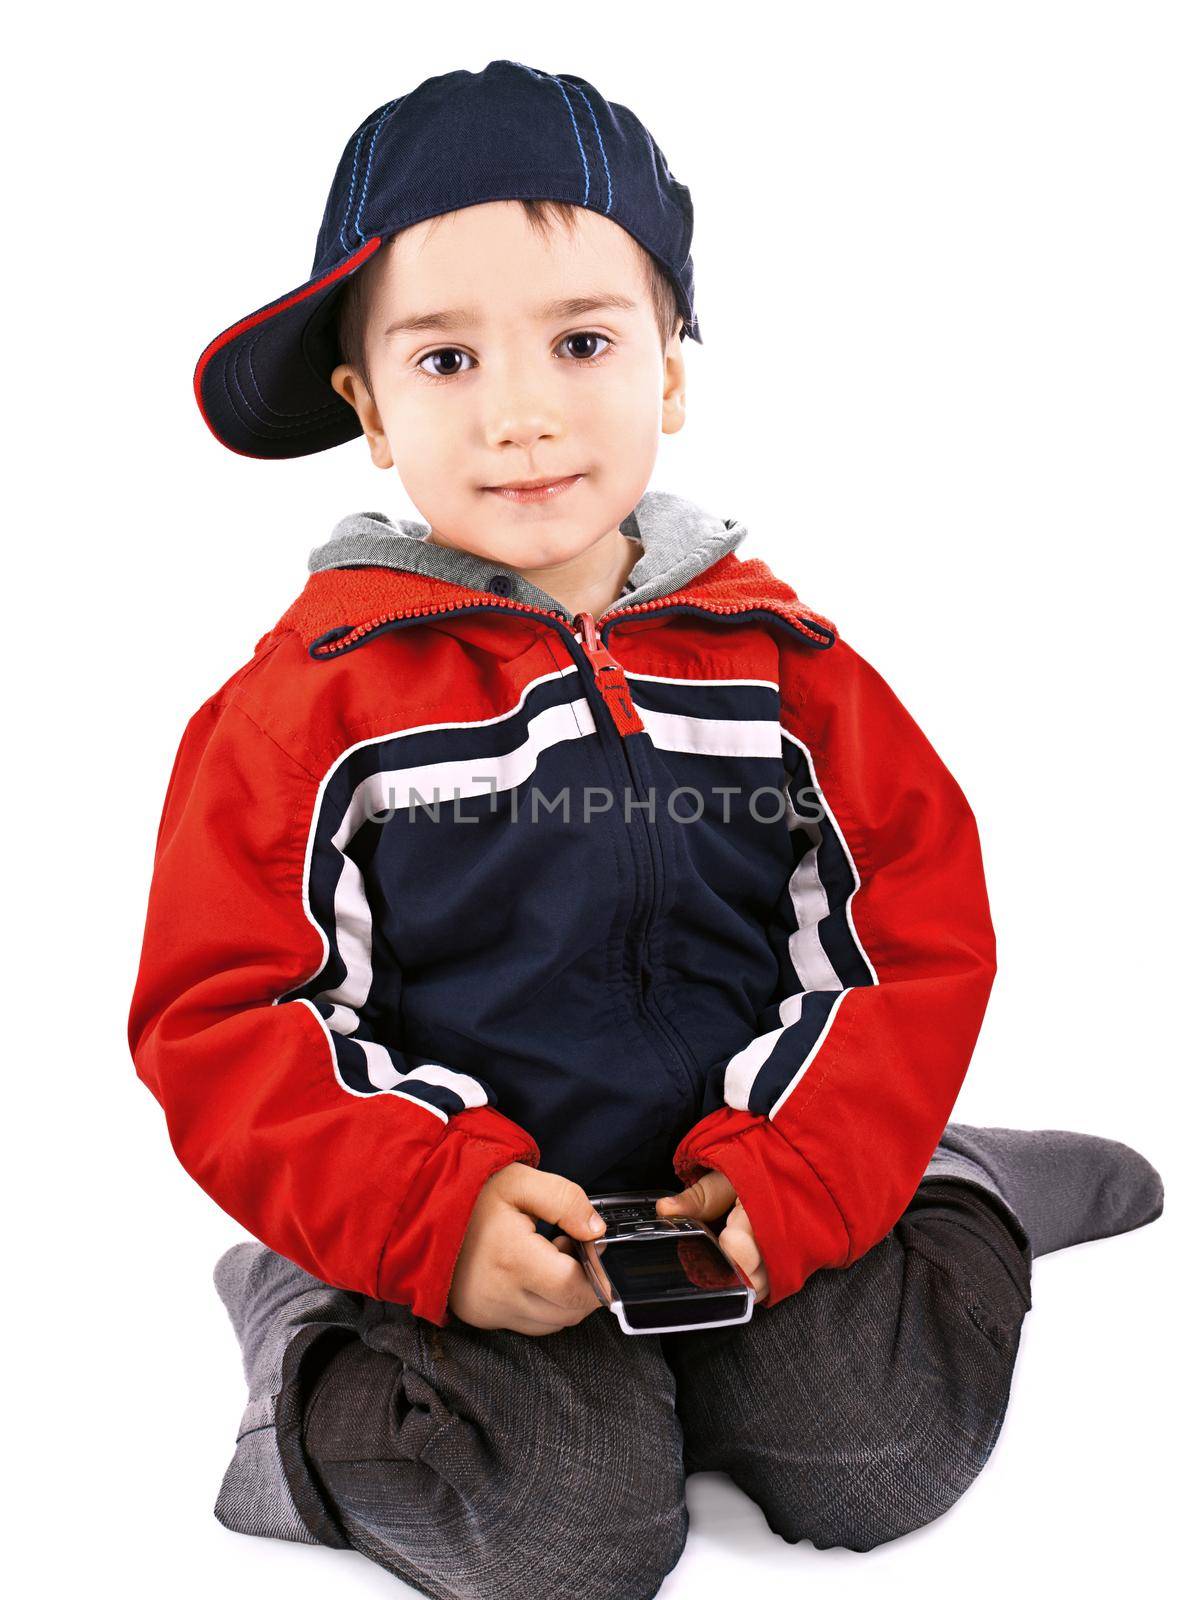 Little boy with cell phone and cap on white background